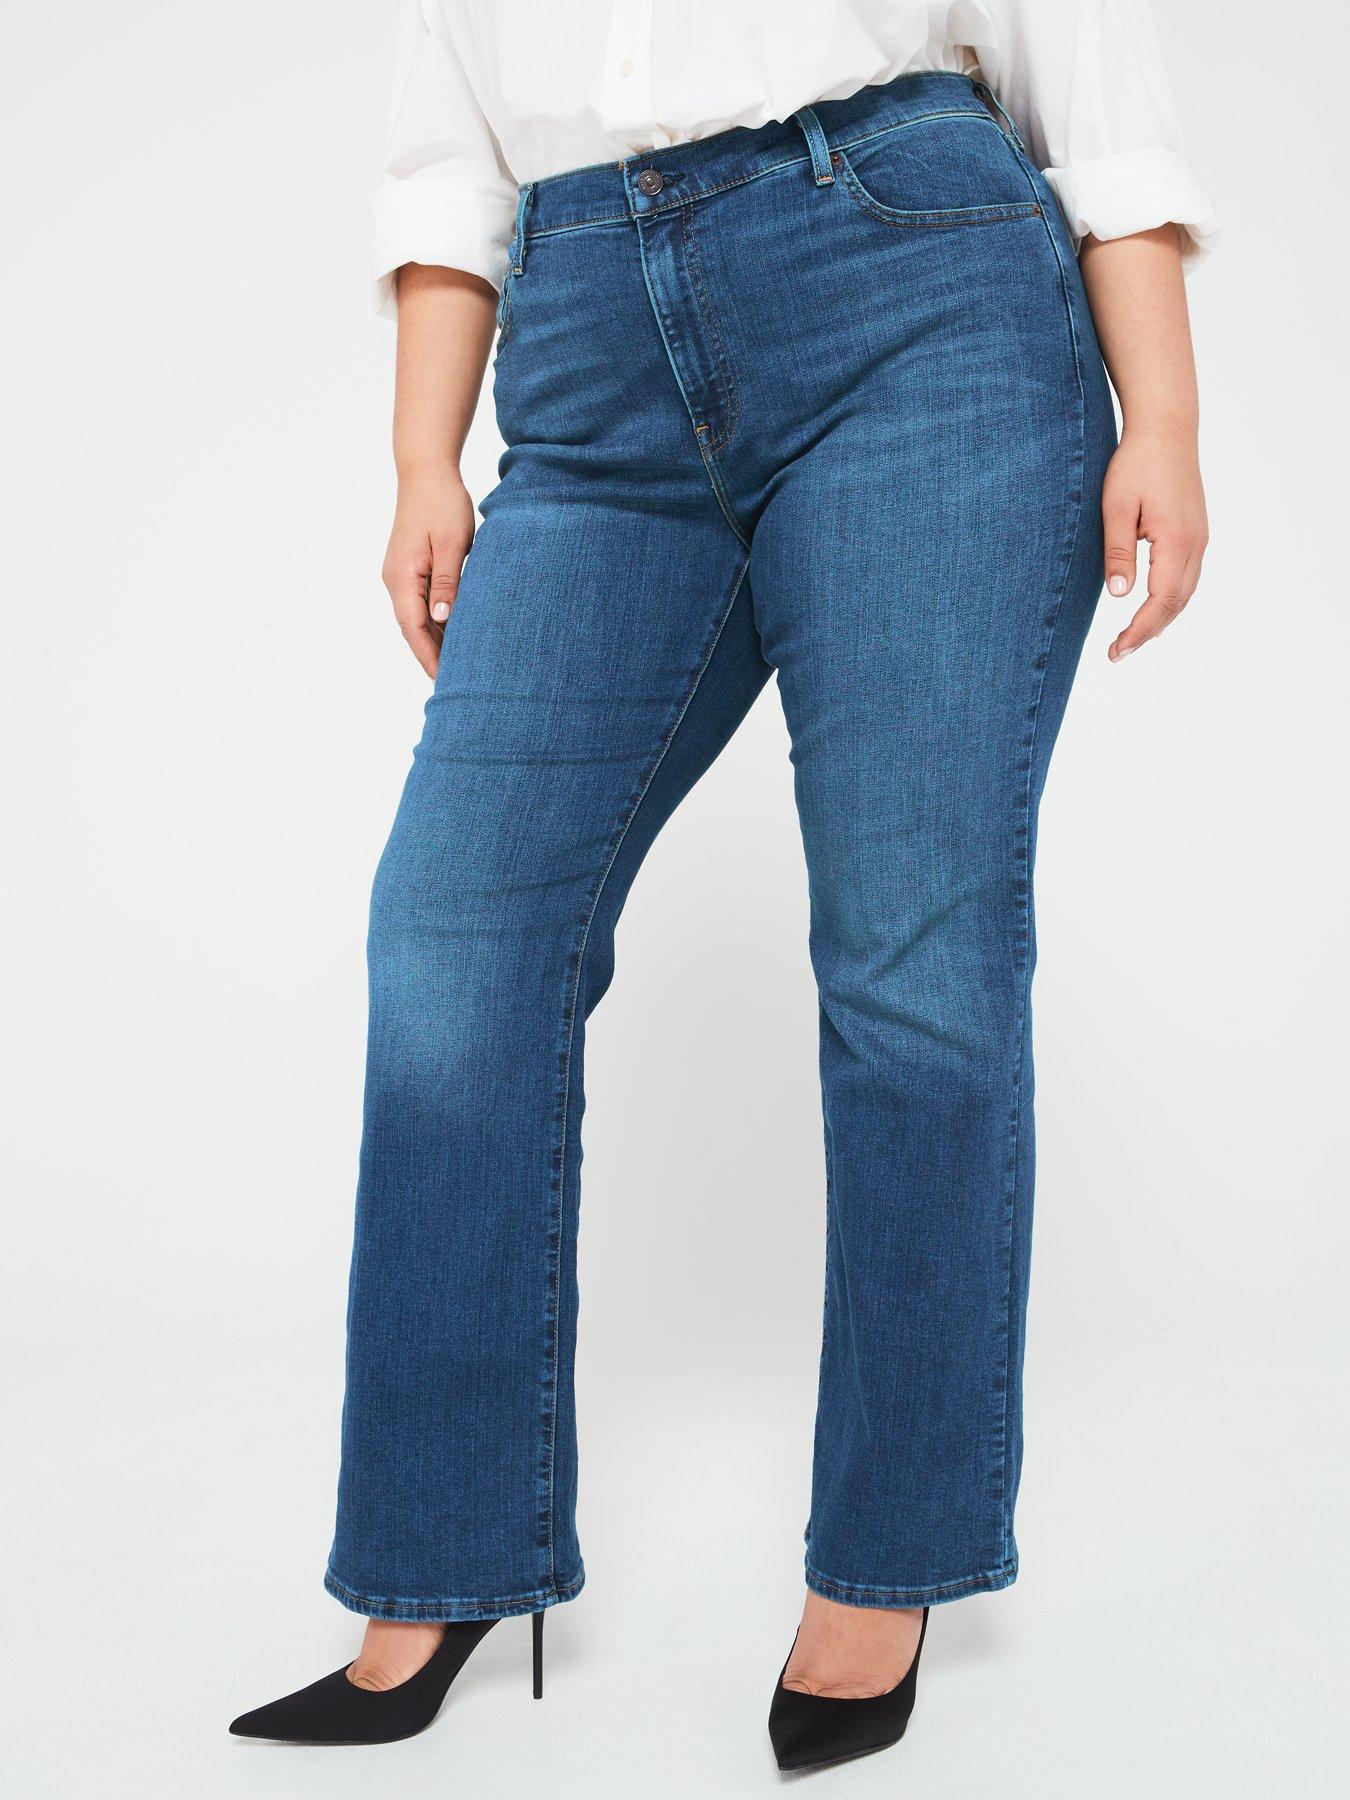 V by Very High Waist Mom Jeans - Mid Wash Blue